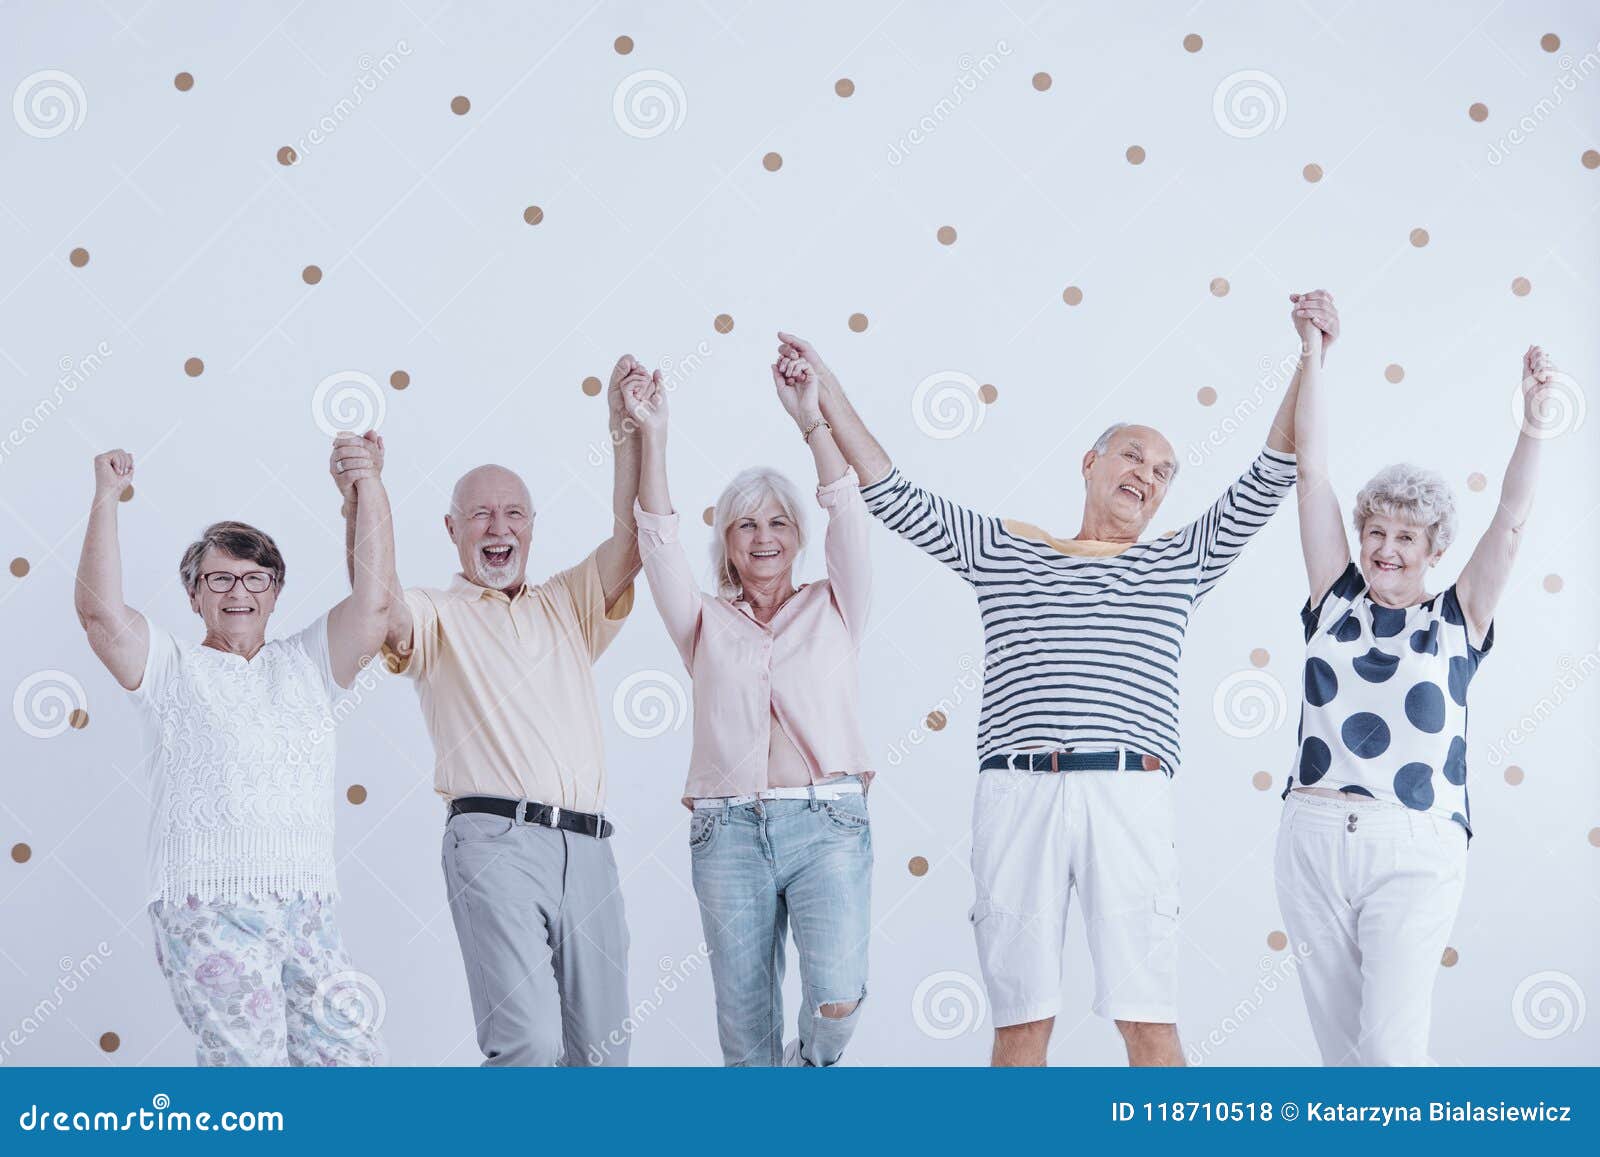 group of active elderly people holding hands up and enjoying meeting